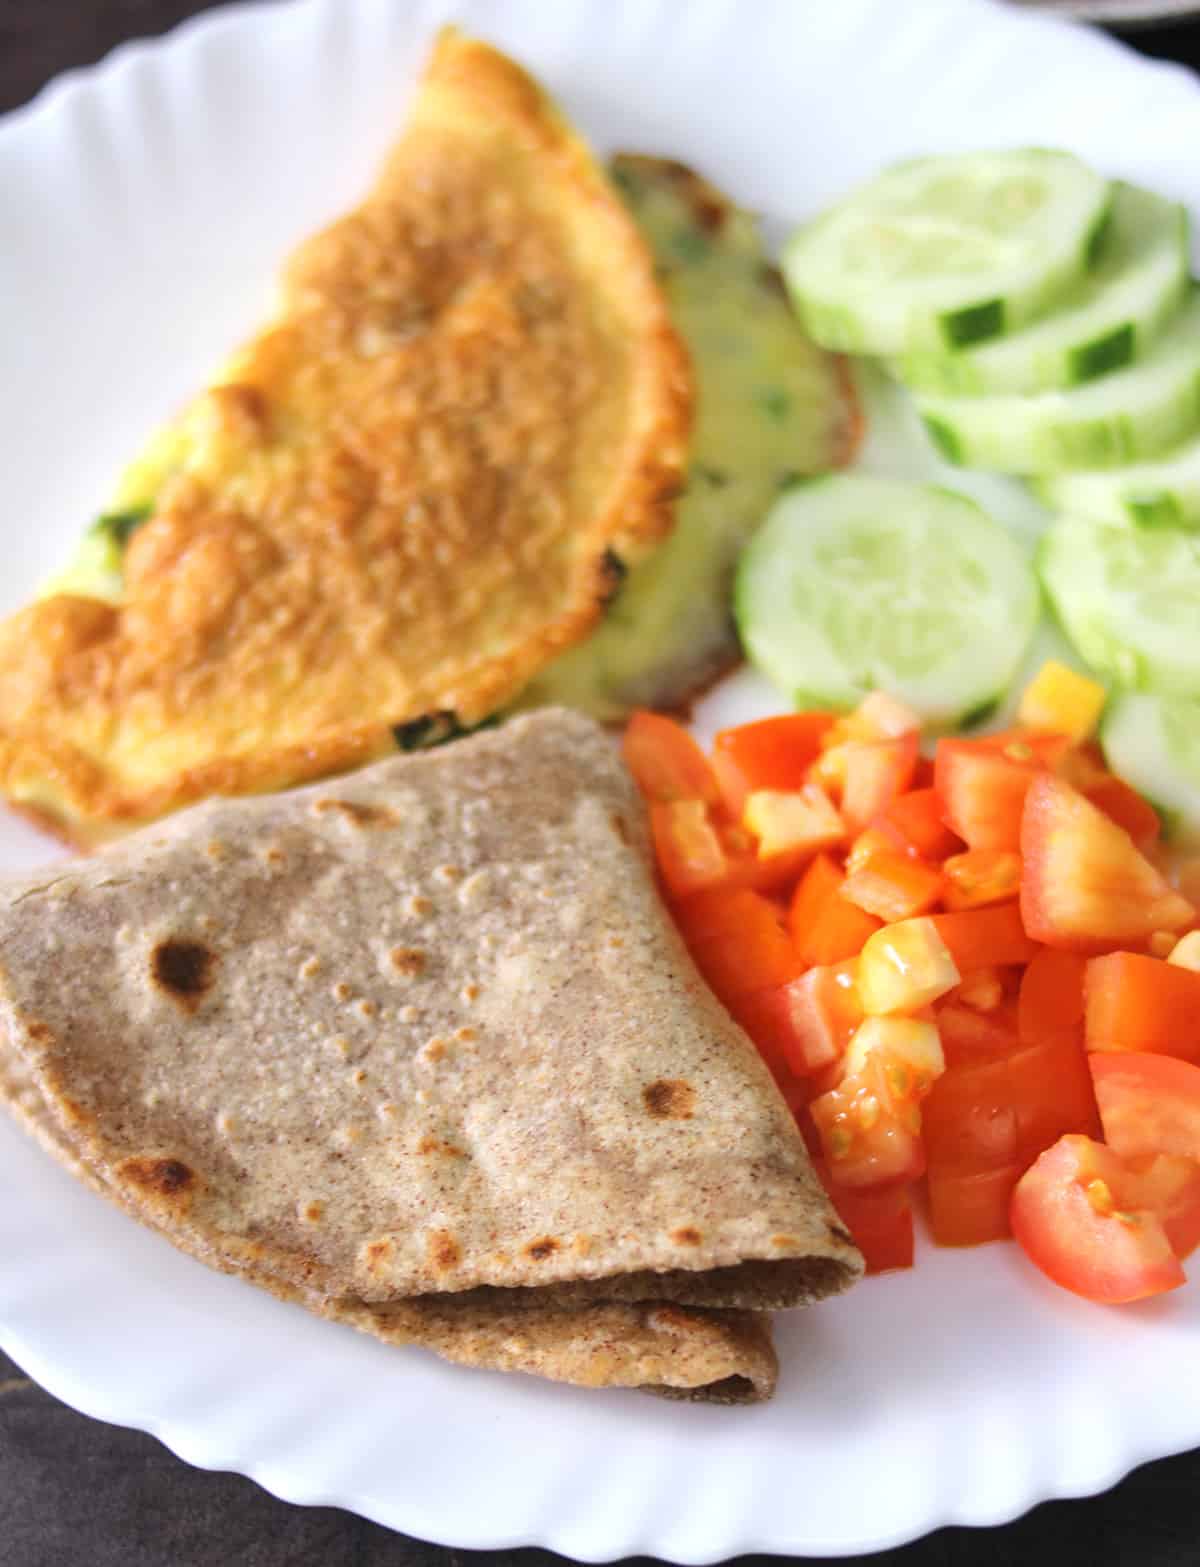 healthy meal under 500 calories for weight loss diet (roti, omelet, cucumber, tomatoes)